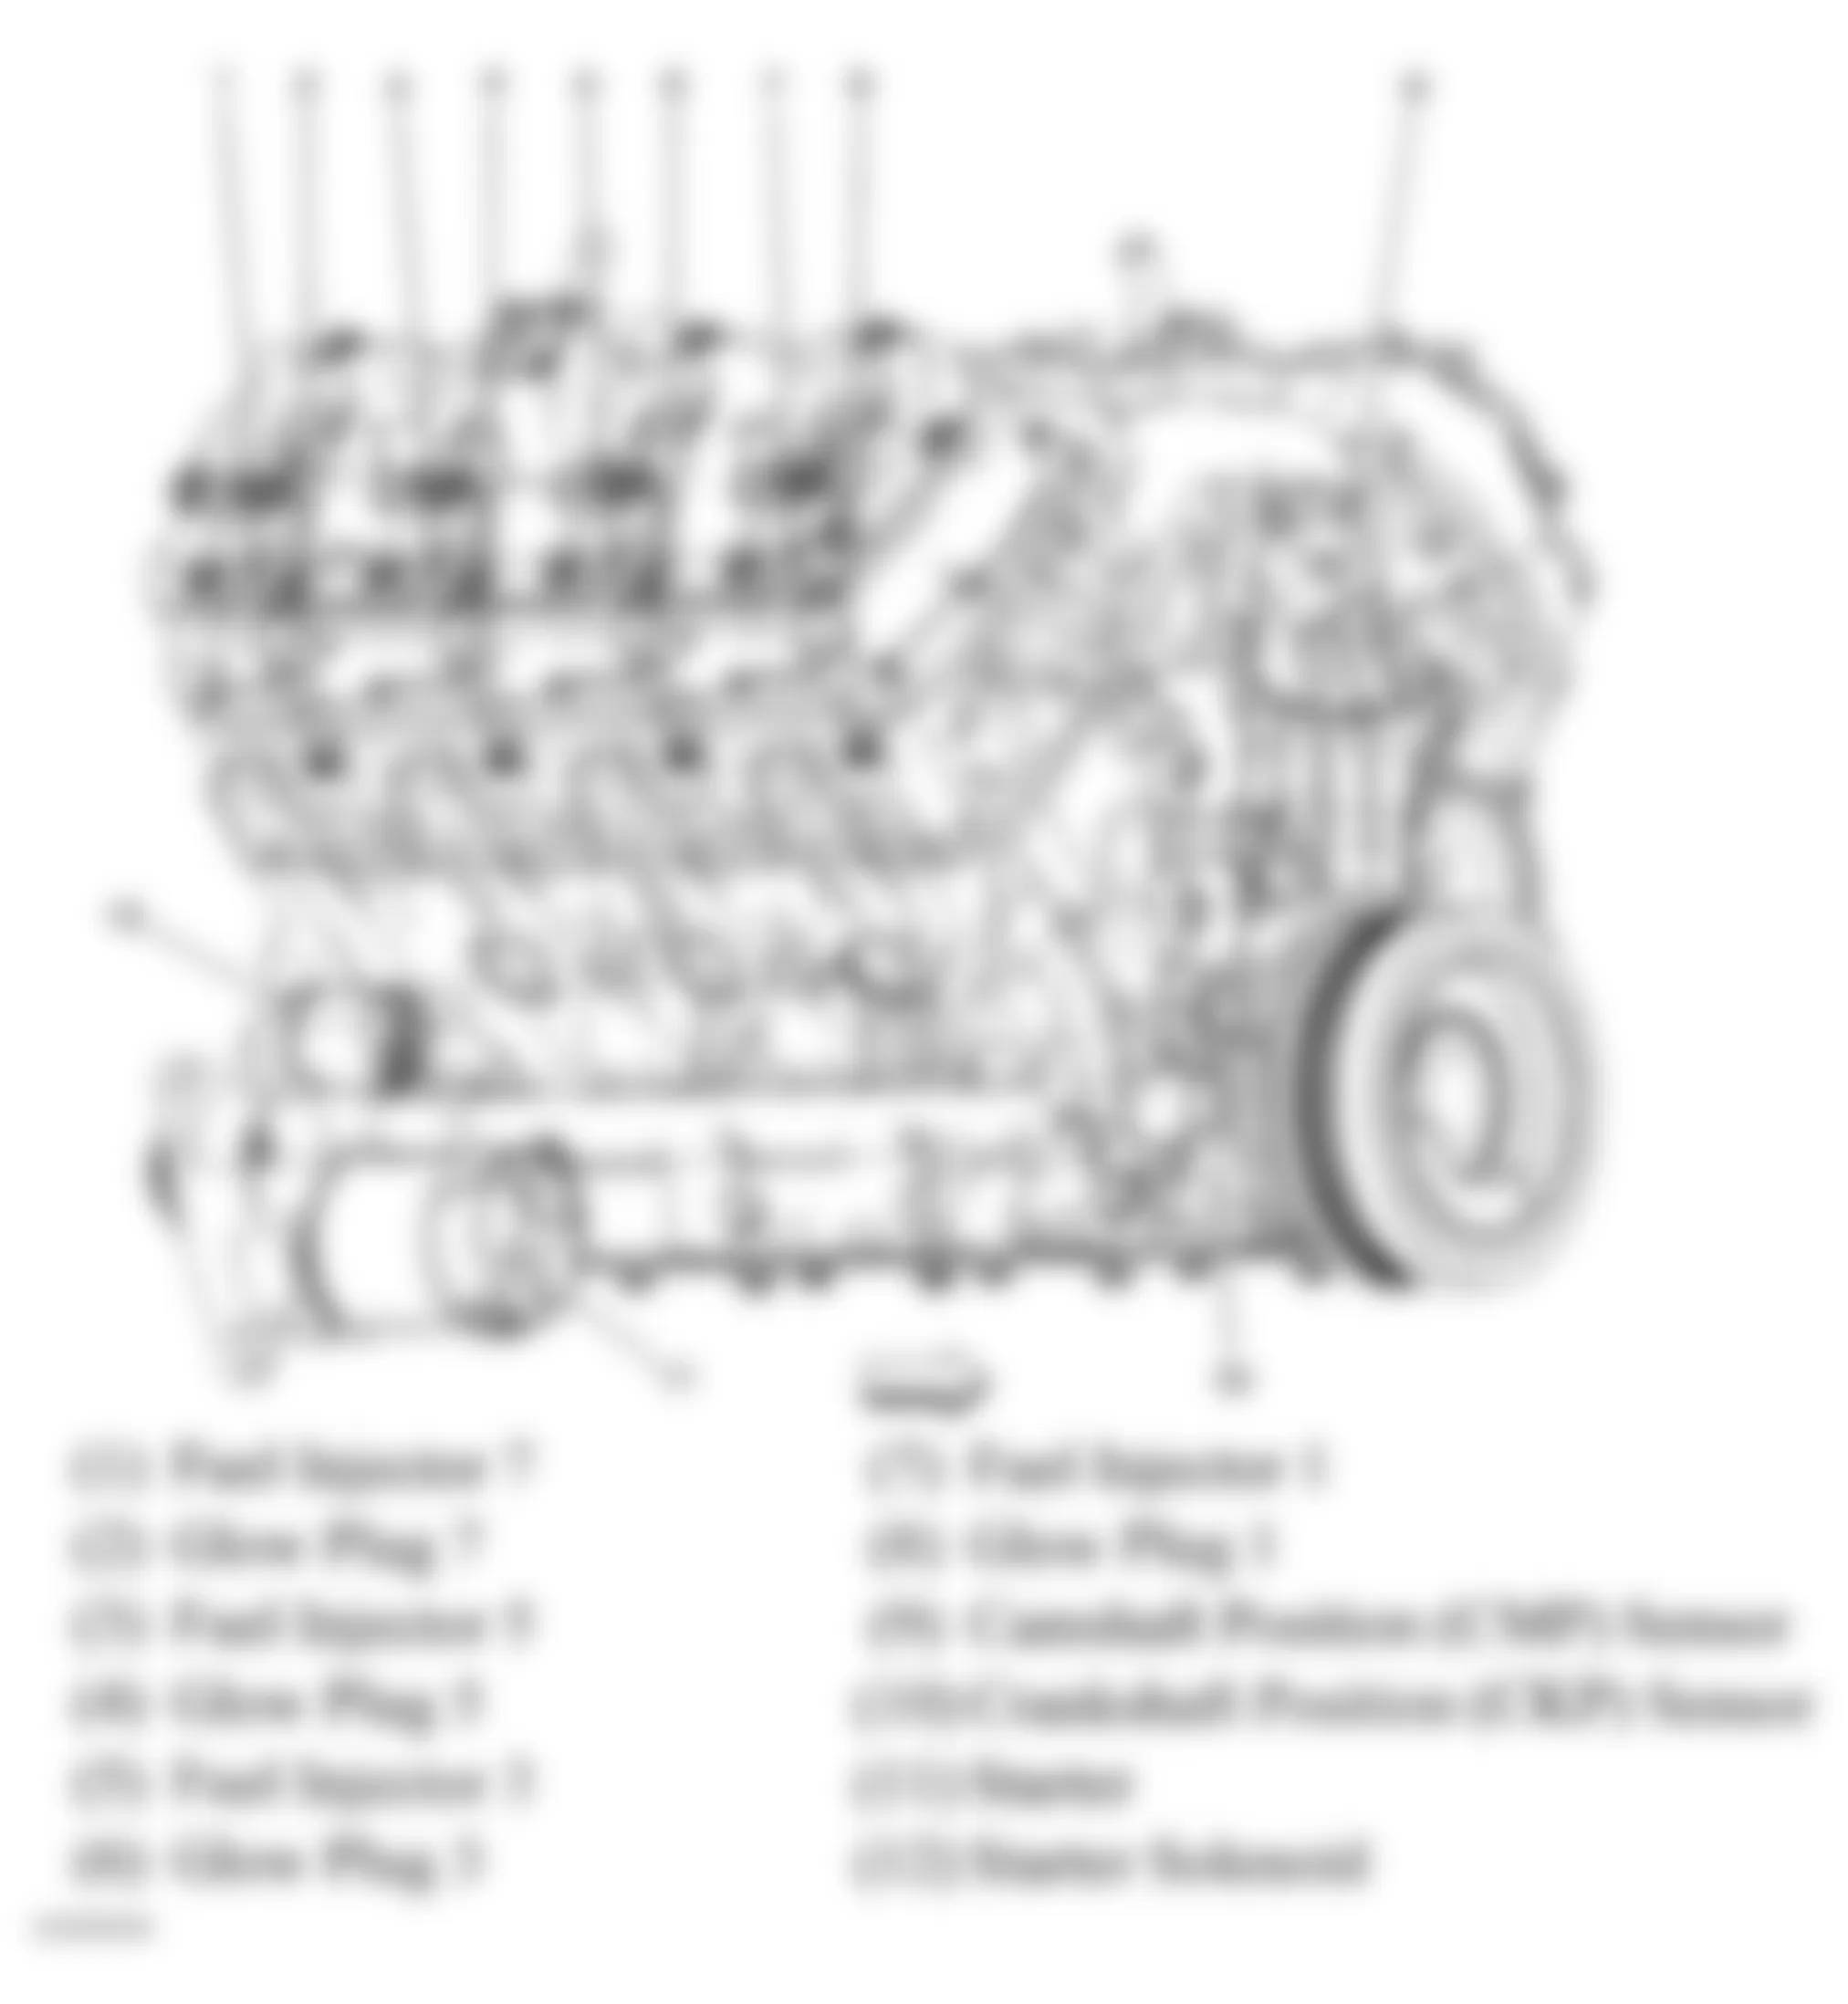 GMC Savana G2500 2008 - Component Locations -  Right Side Of Engine (6.6L)